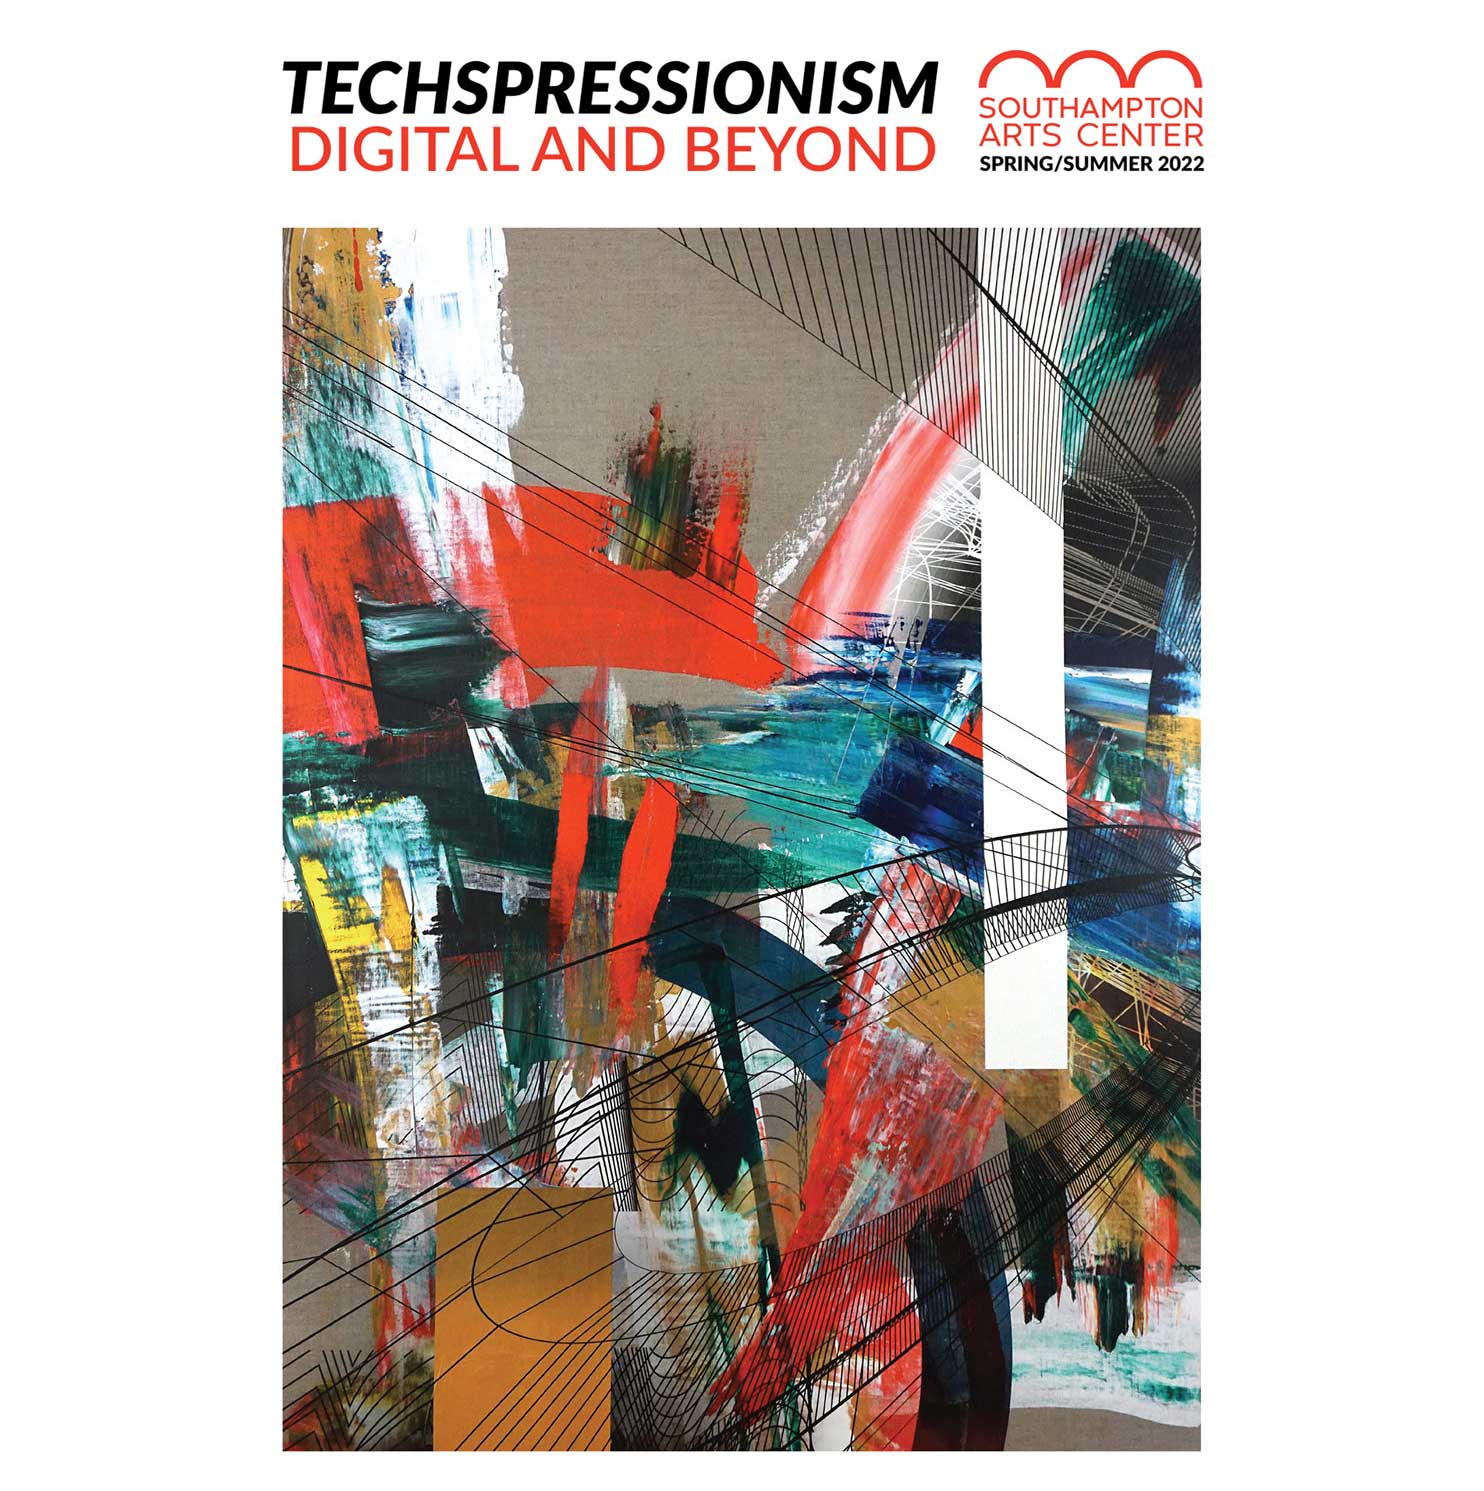 Techspressionism: Digital and Beyond at Southampton Arts Center